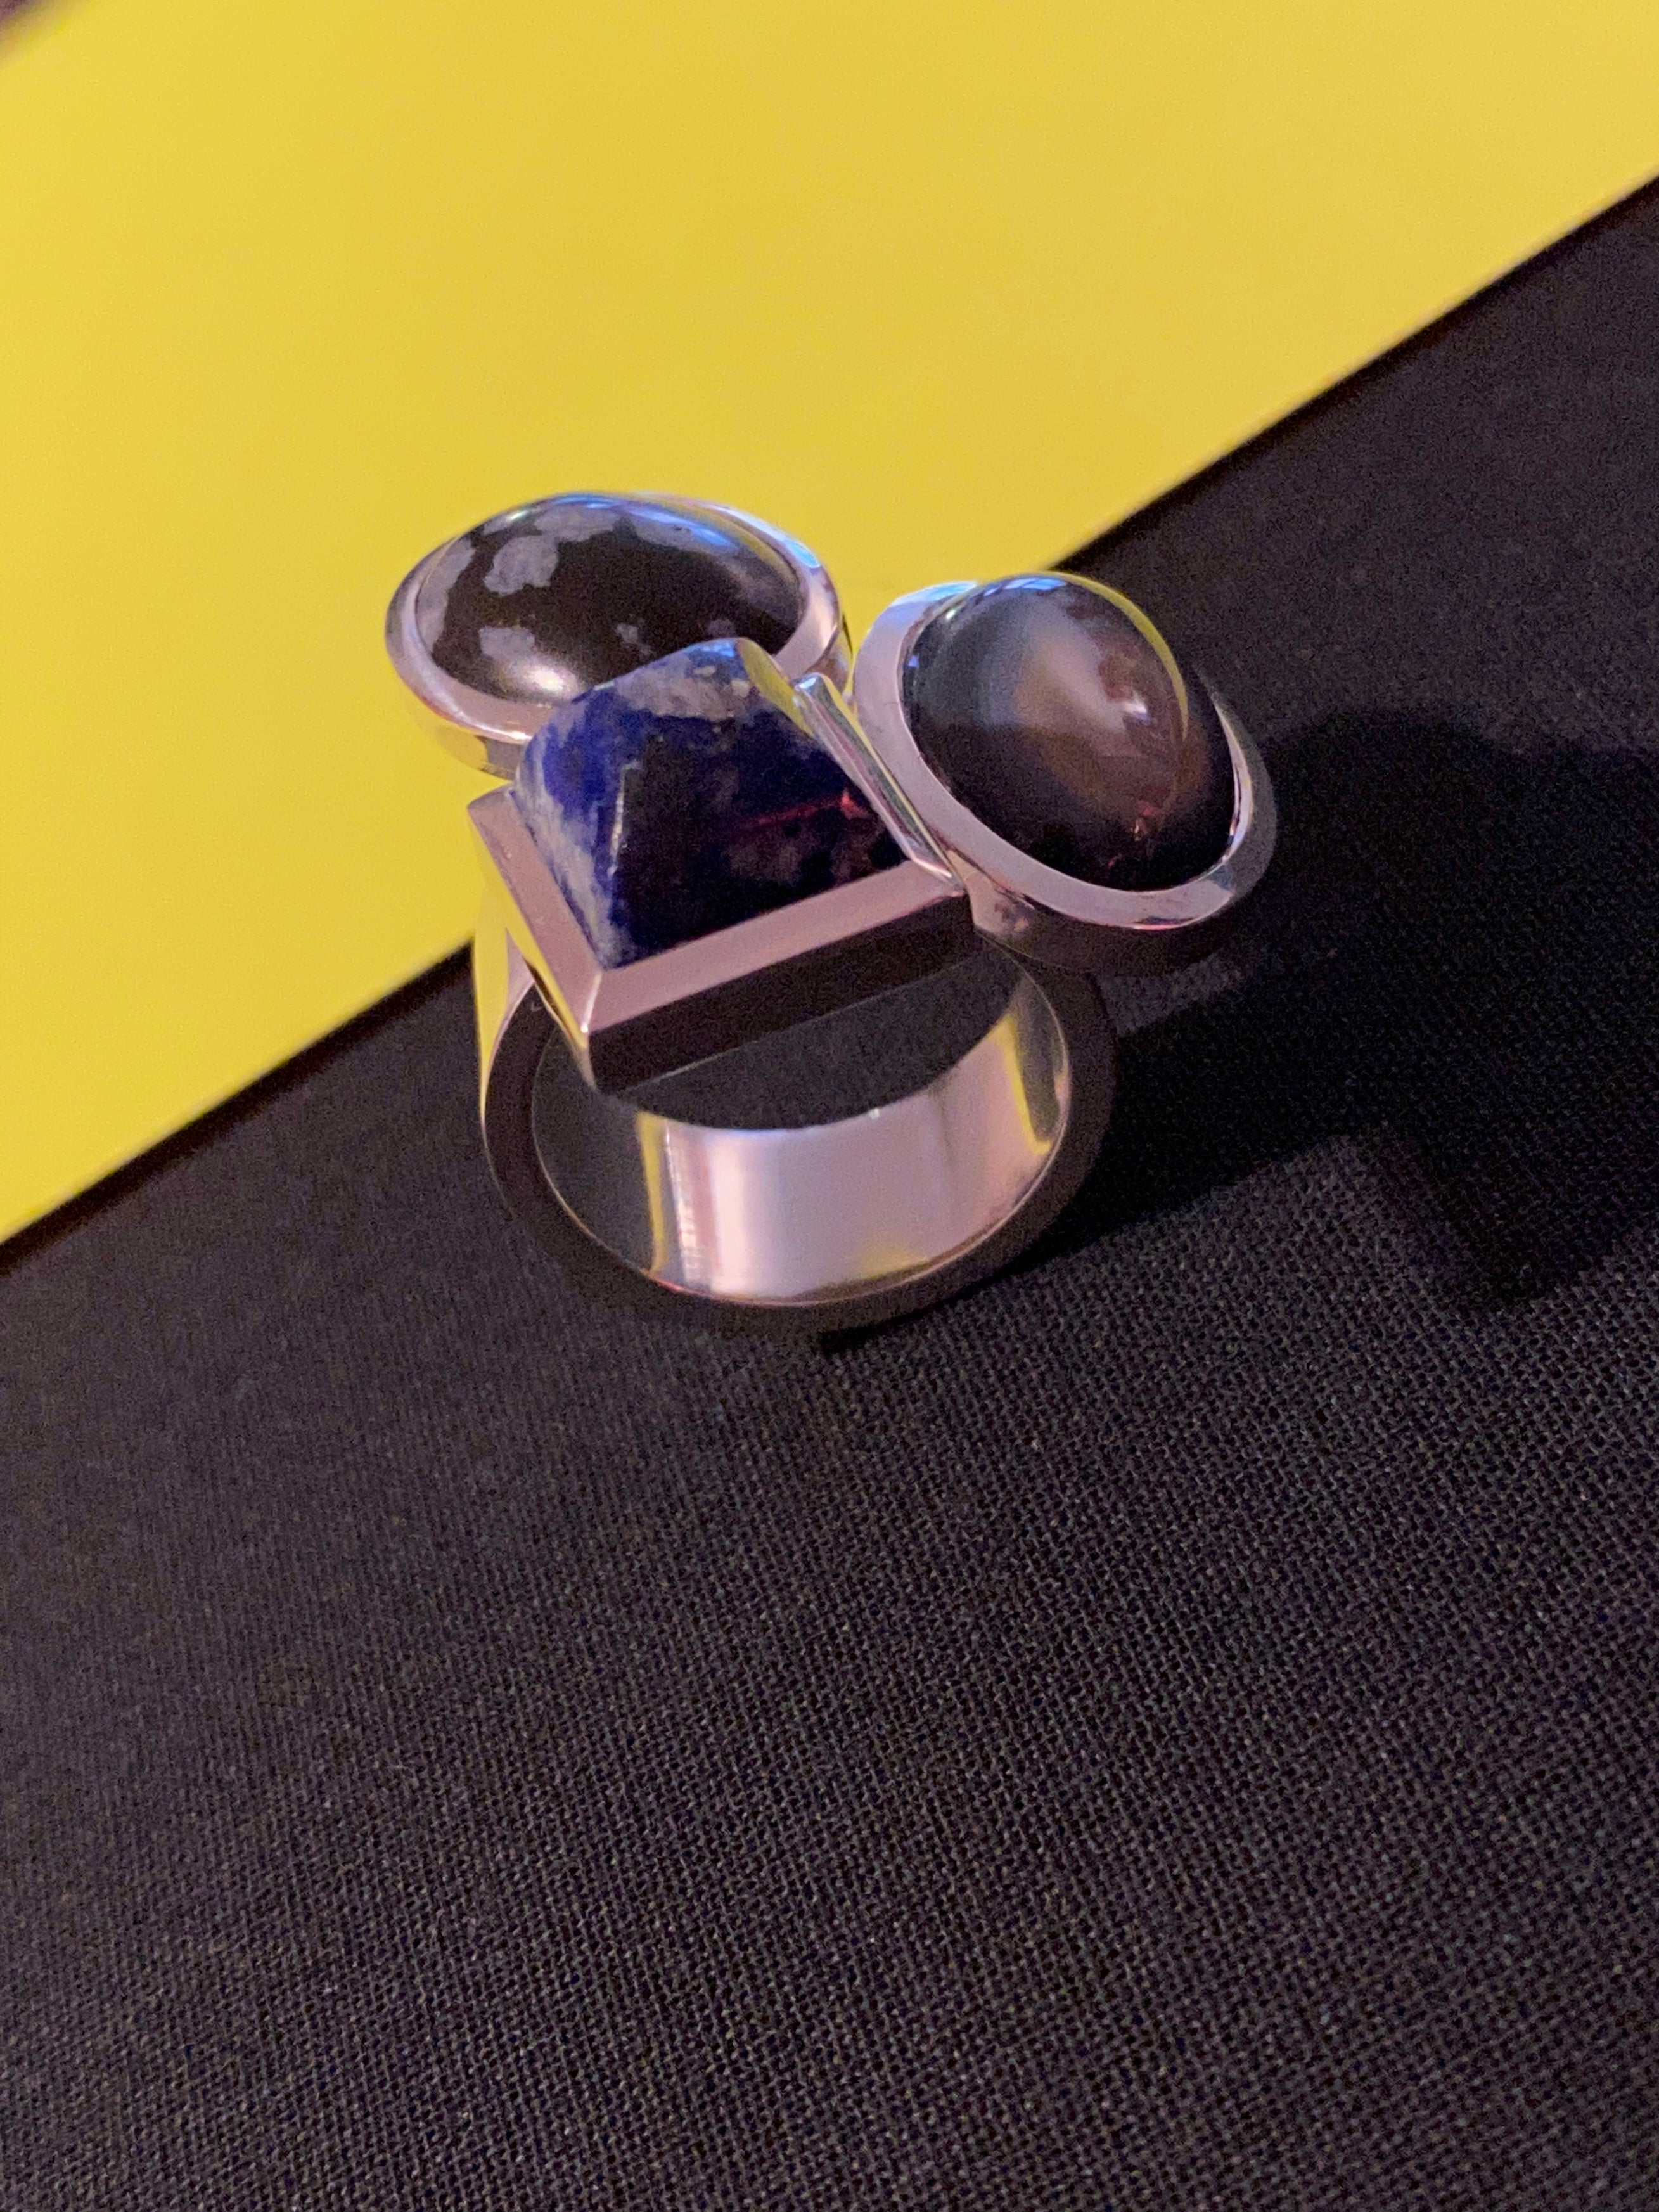 Bold & Unique silver ring. Big, wide & with 3 stones. Obsidian. Agate. Sodalite.